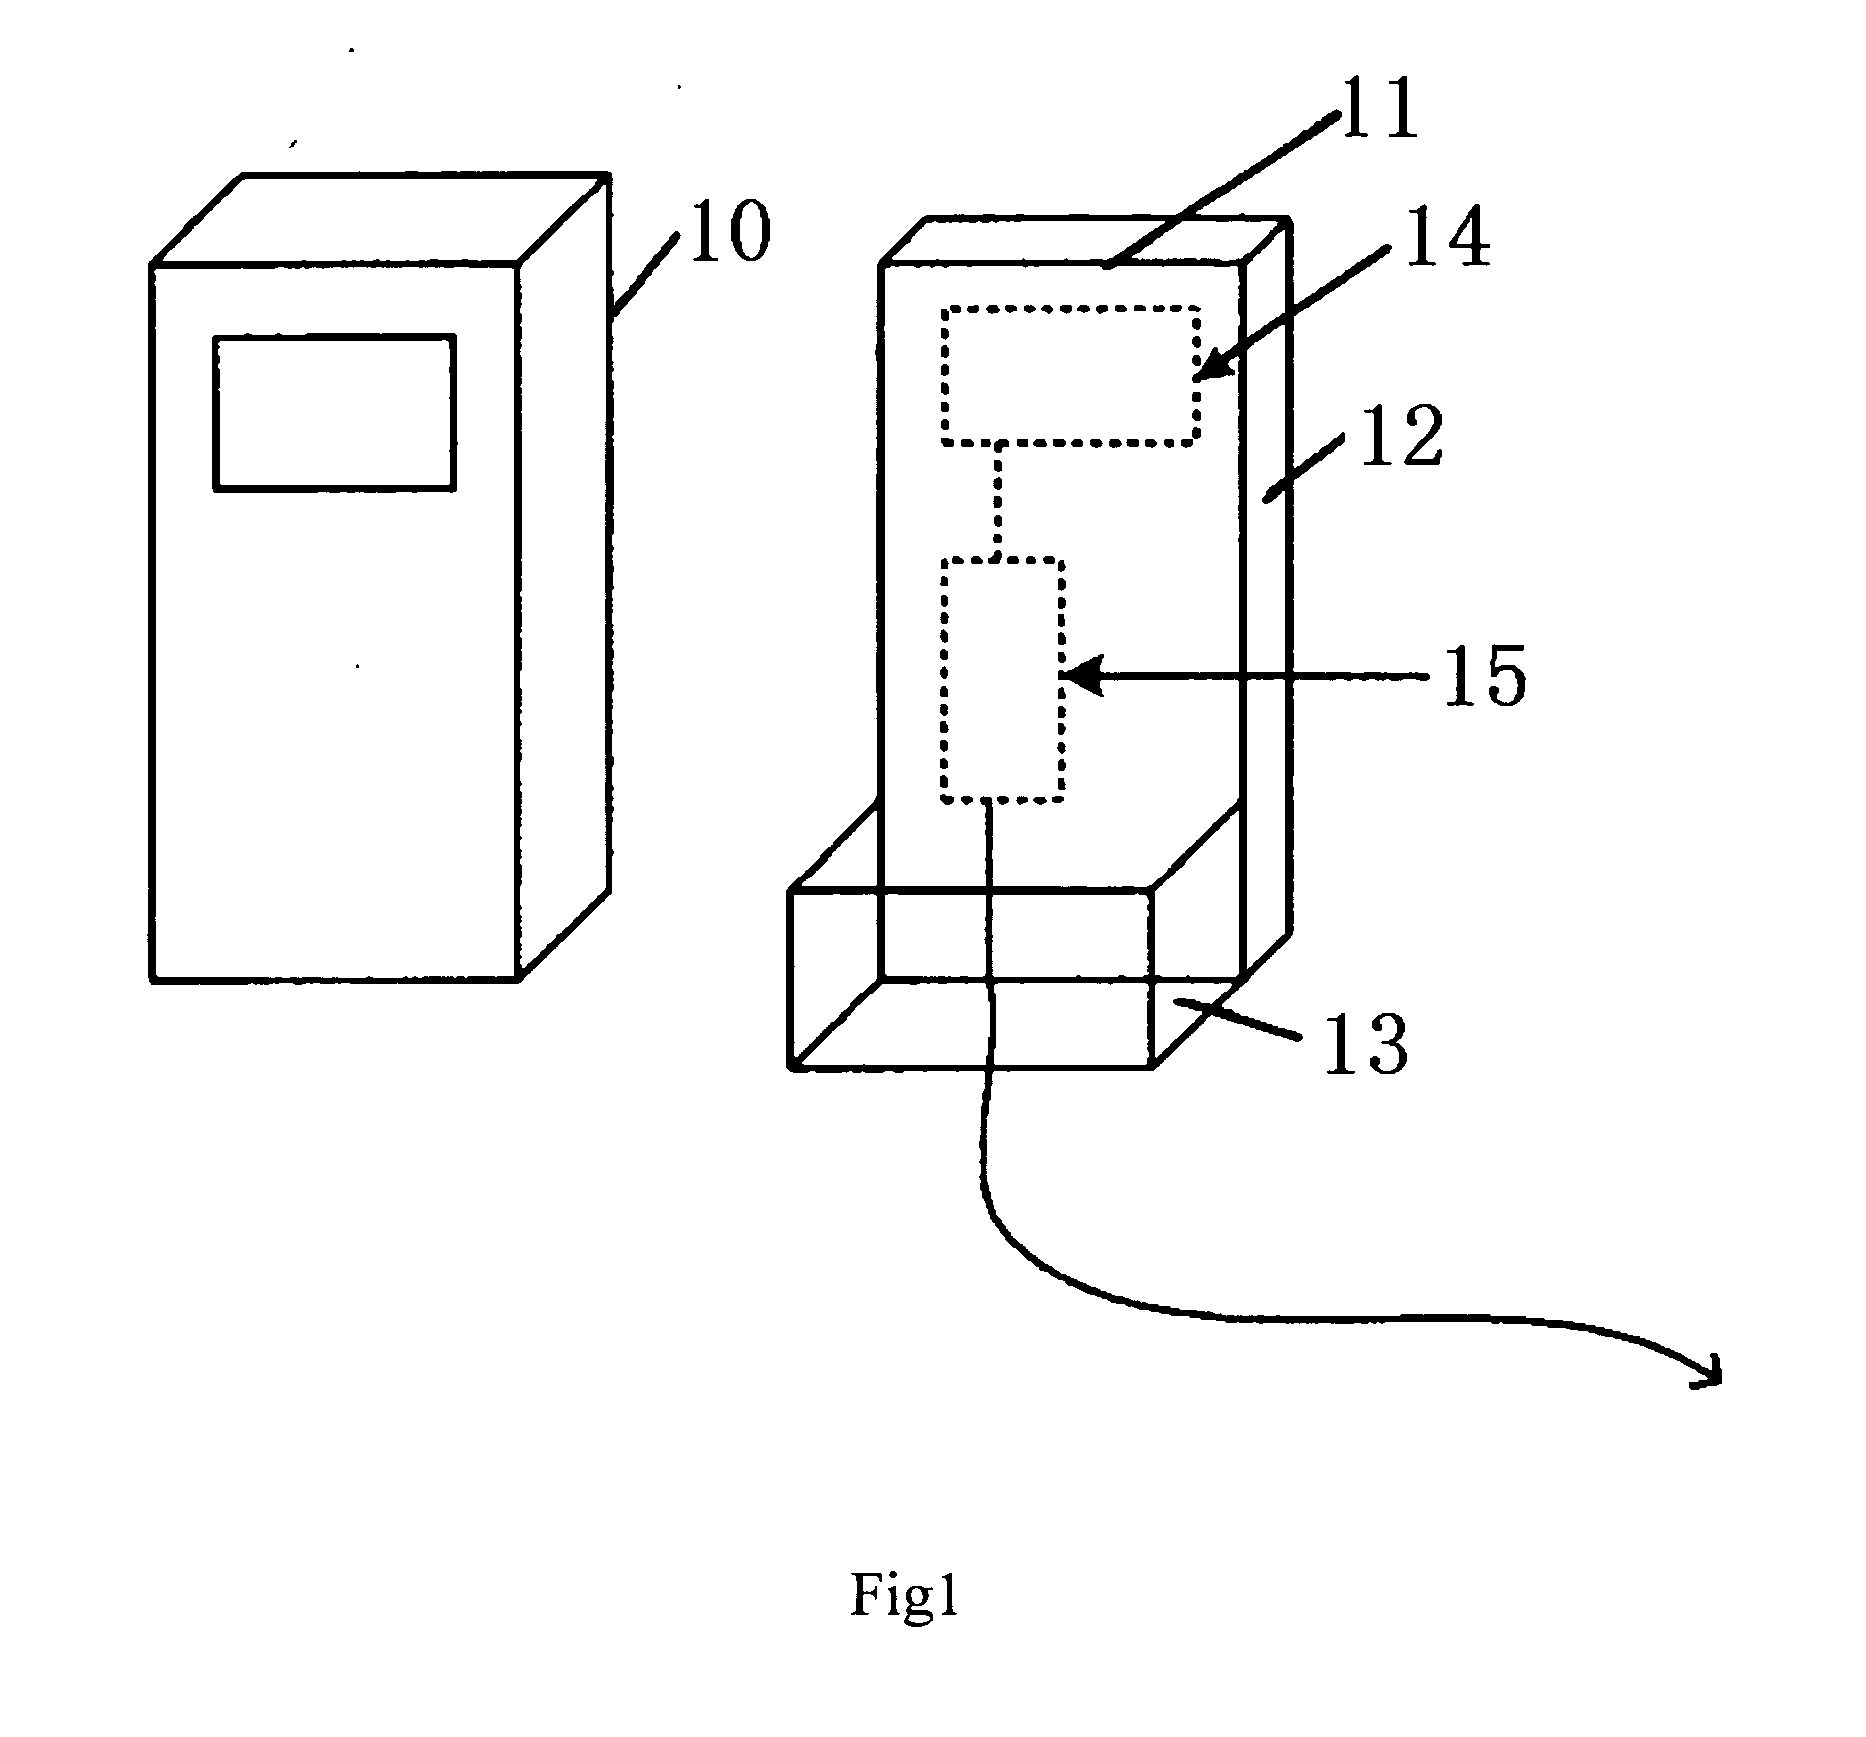 Method for coupling the mobile terminal with the adapter